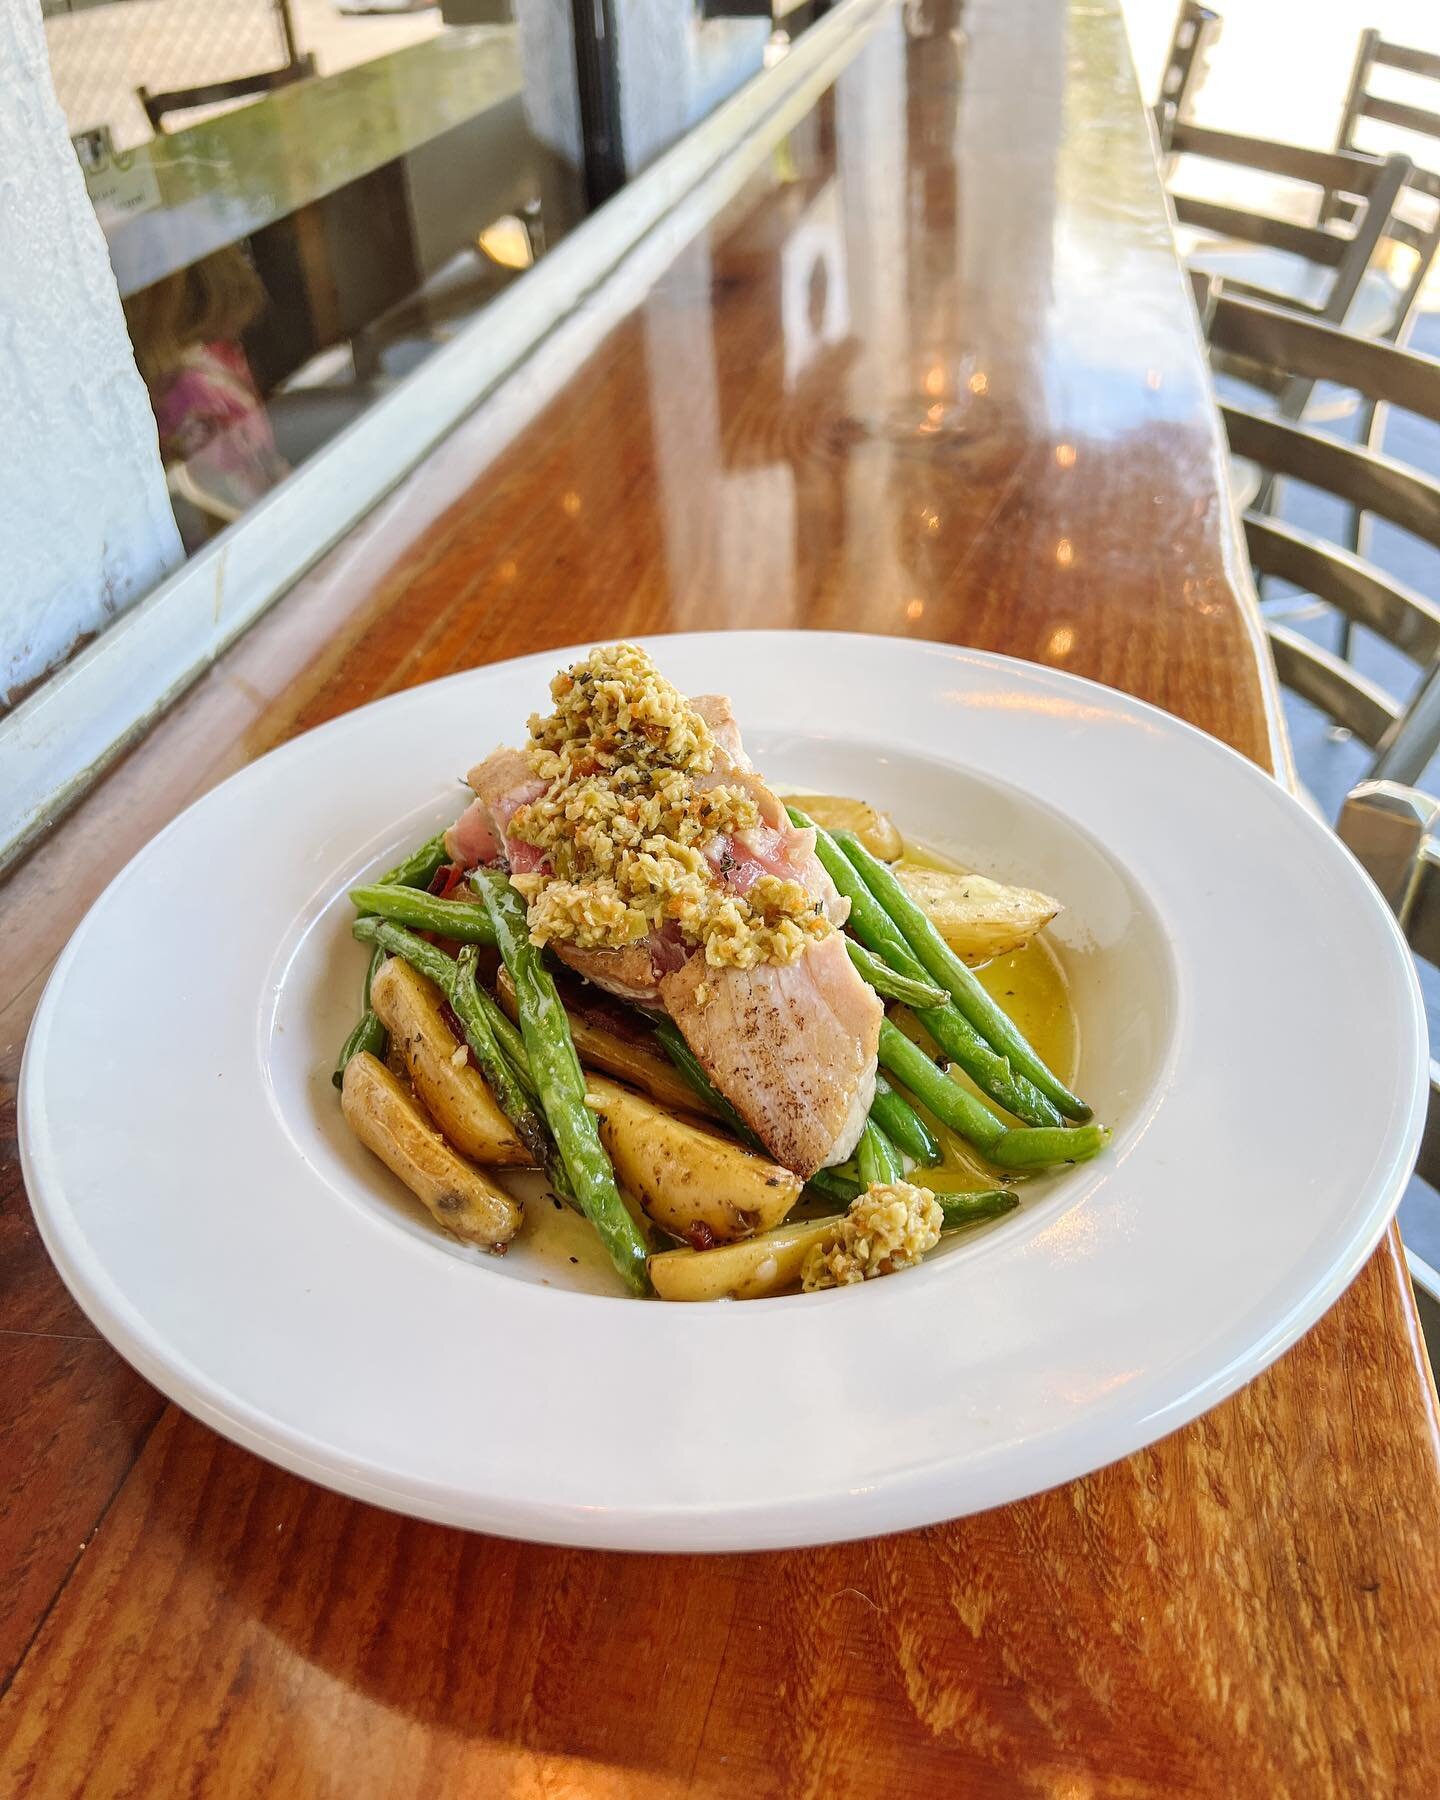 🎉 Daily Special 🎉

PAN SEARED TUNA STEAK
with bacon &amp; herb fingerling potatoes, saut&eacute;ed green beans, olive tapenade and lemon aioli.

#whiskgourmet #miamifoodies #miamirestaurant #yummyfoods  #dailyspecials  #pansearedtuna #olivetapenade